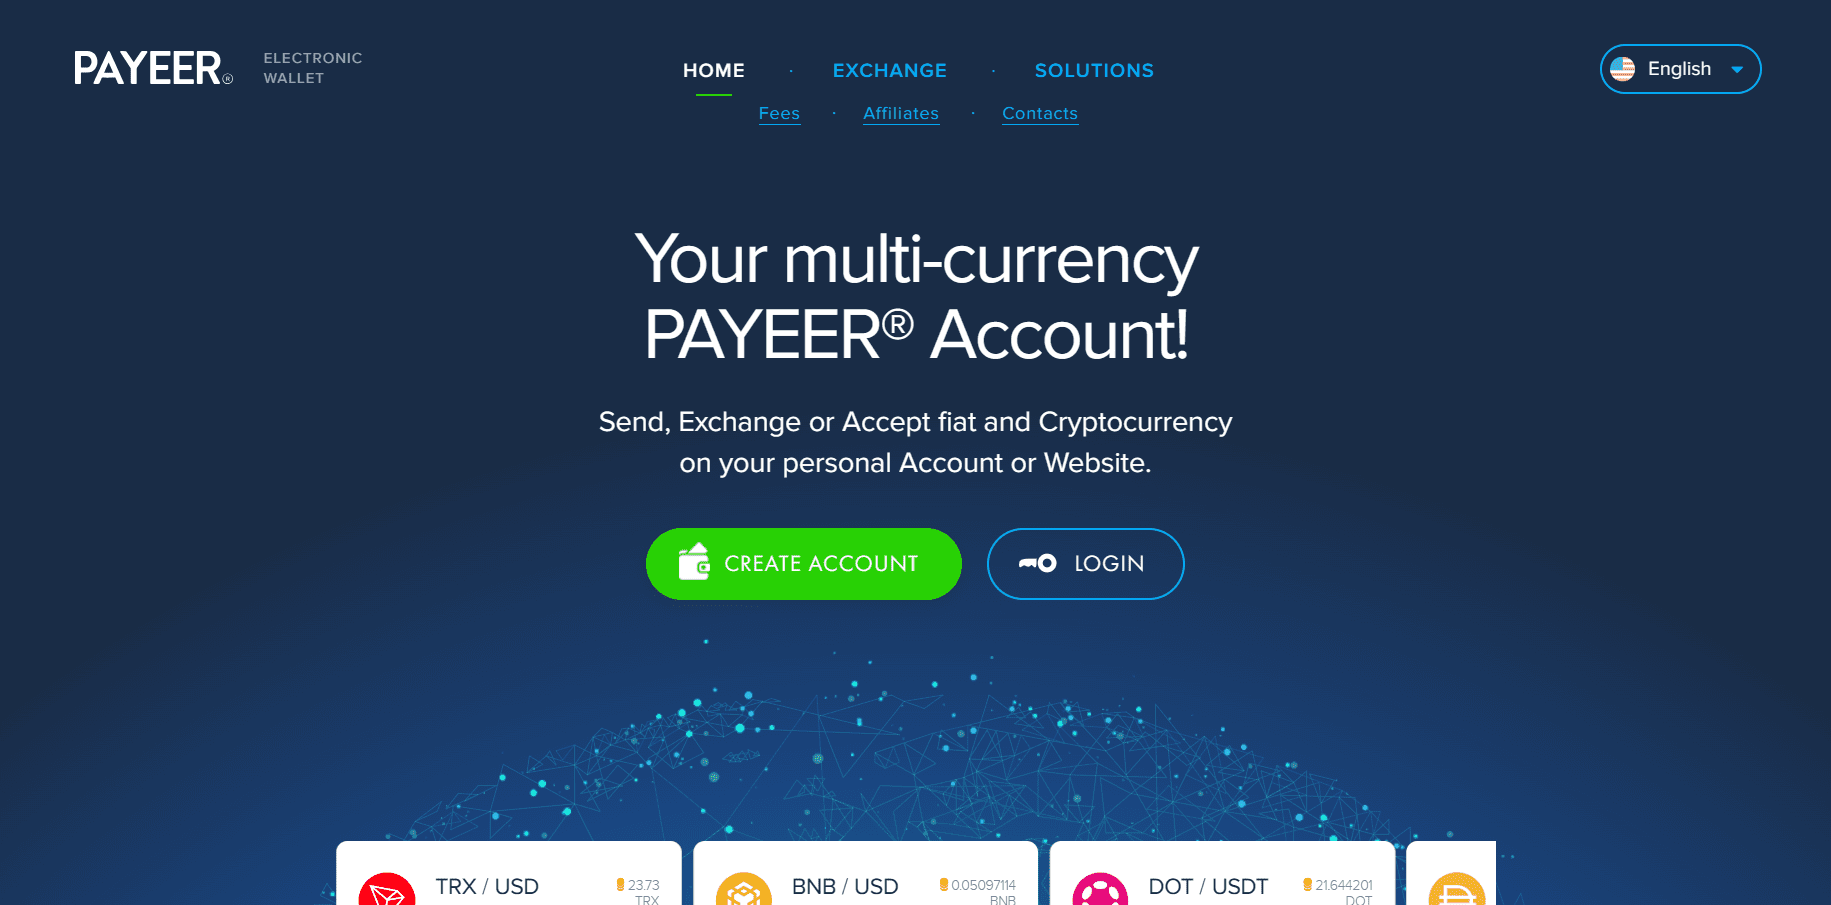 What Is Payeer? How To Use The Payeer Wallet 